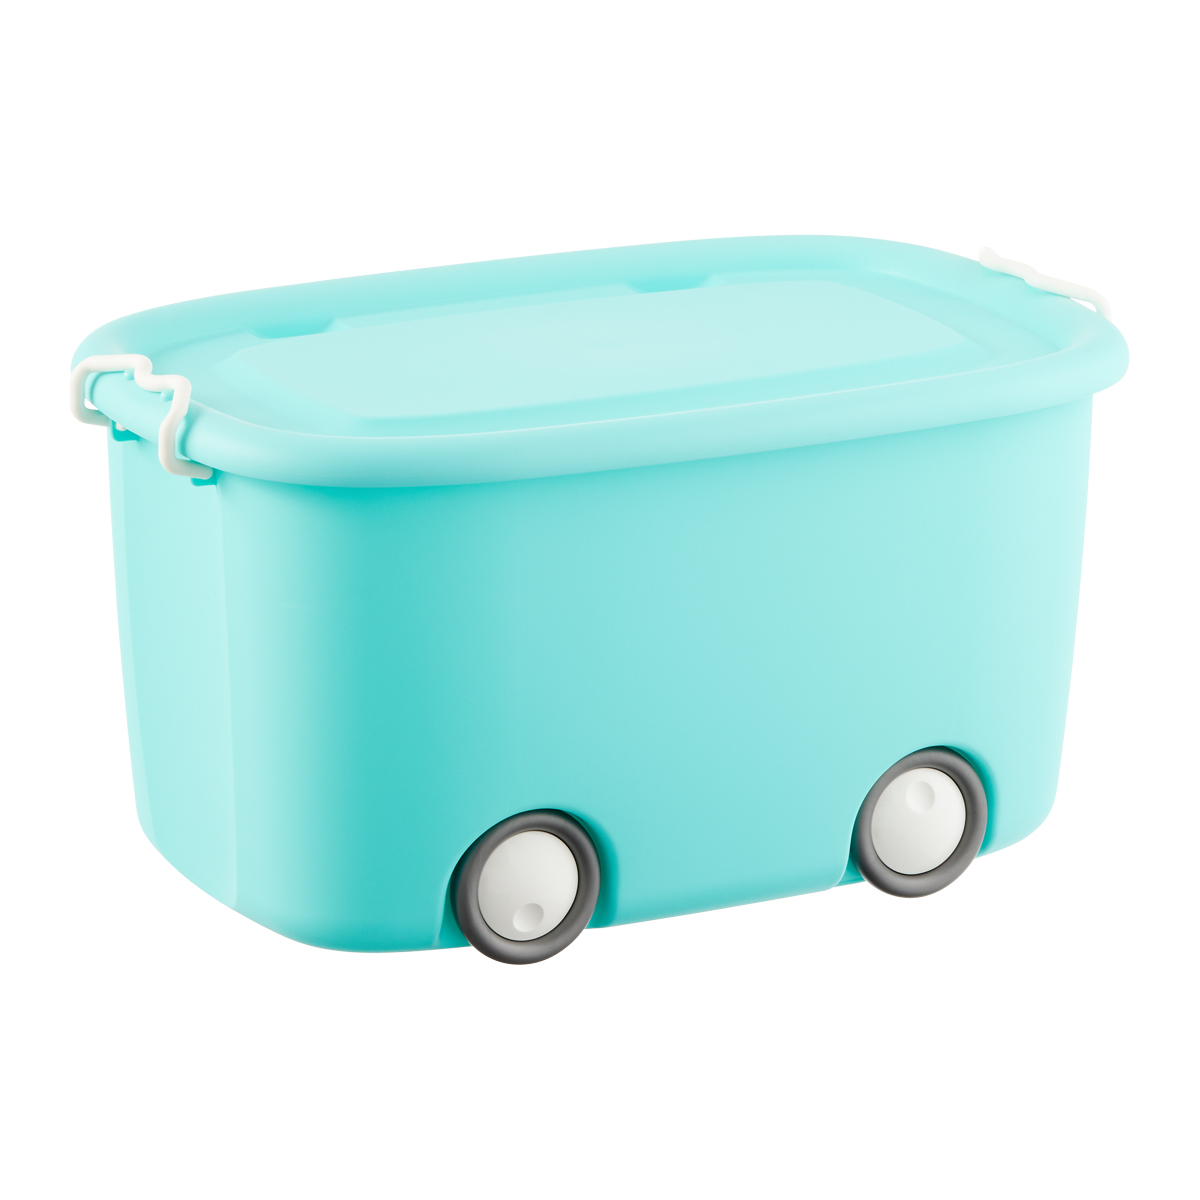 https://www.containerstore.com/catalogimages/437277/10077713_Rolling_Storage_Bin_With_Li.jpg